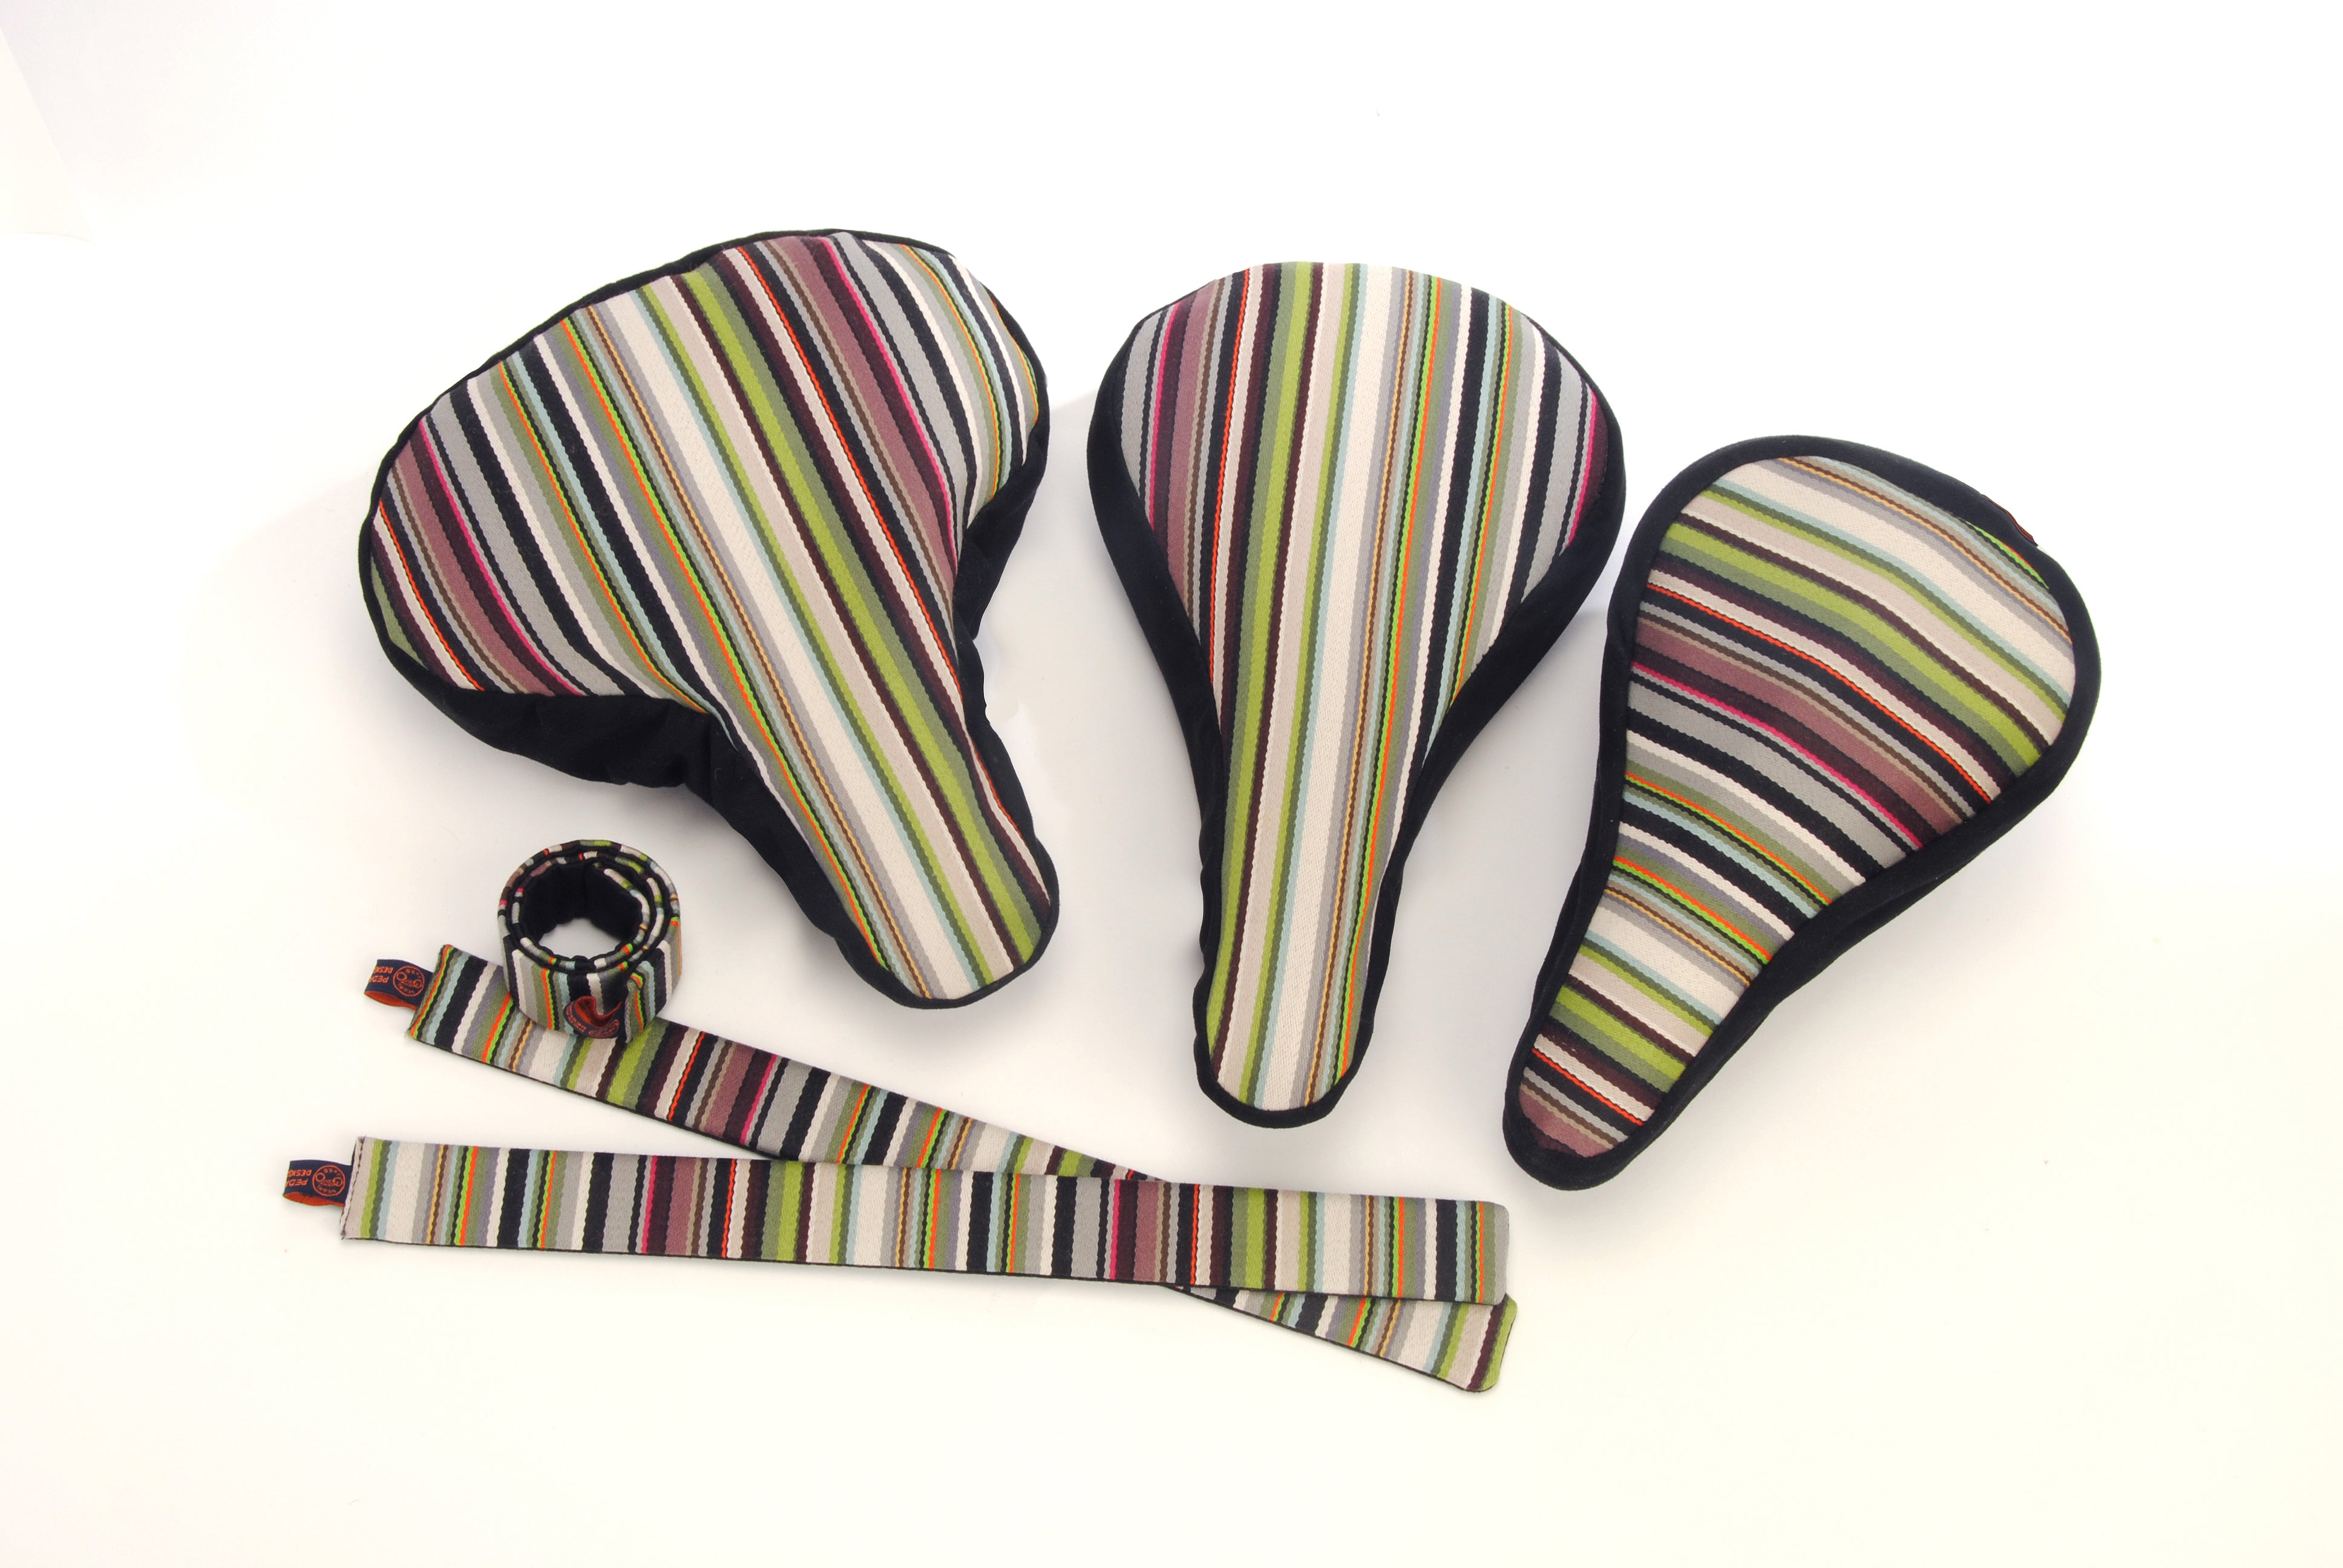 Matching_for_the_whole_family_Paul_Smith_Pure_luxury_comfortable_bike_seat_cover_Pedalshed_Black_multicoloured_Stripes